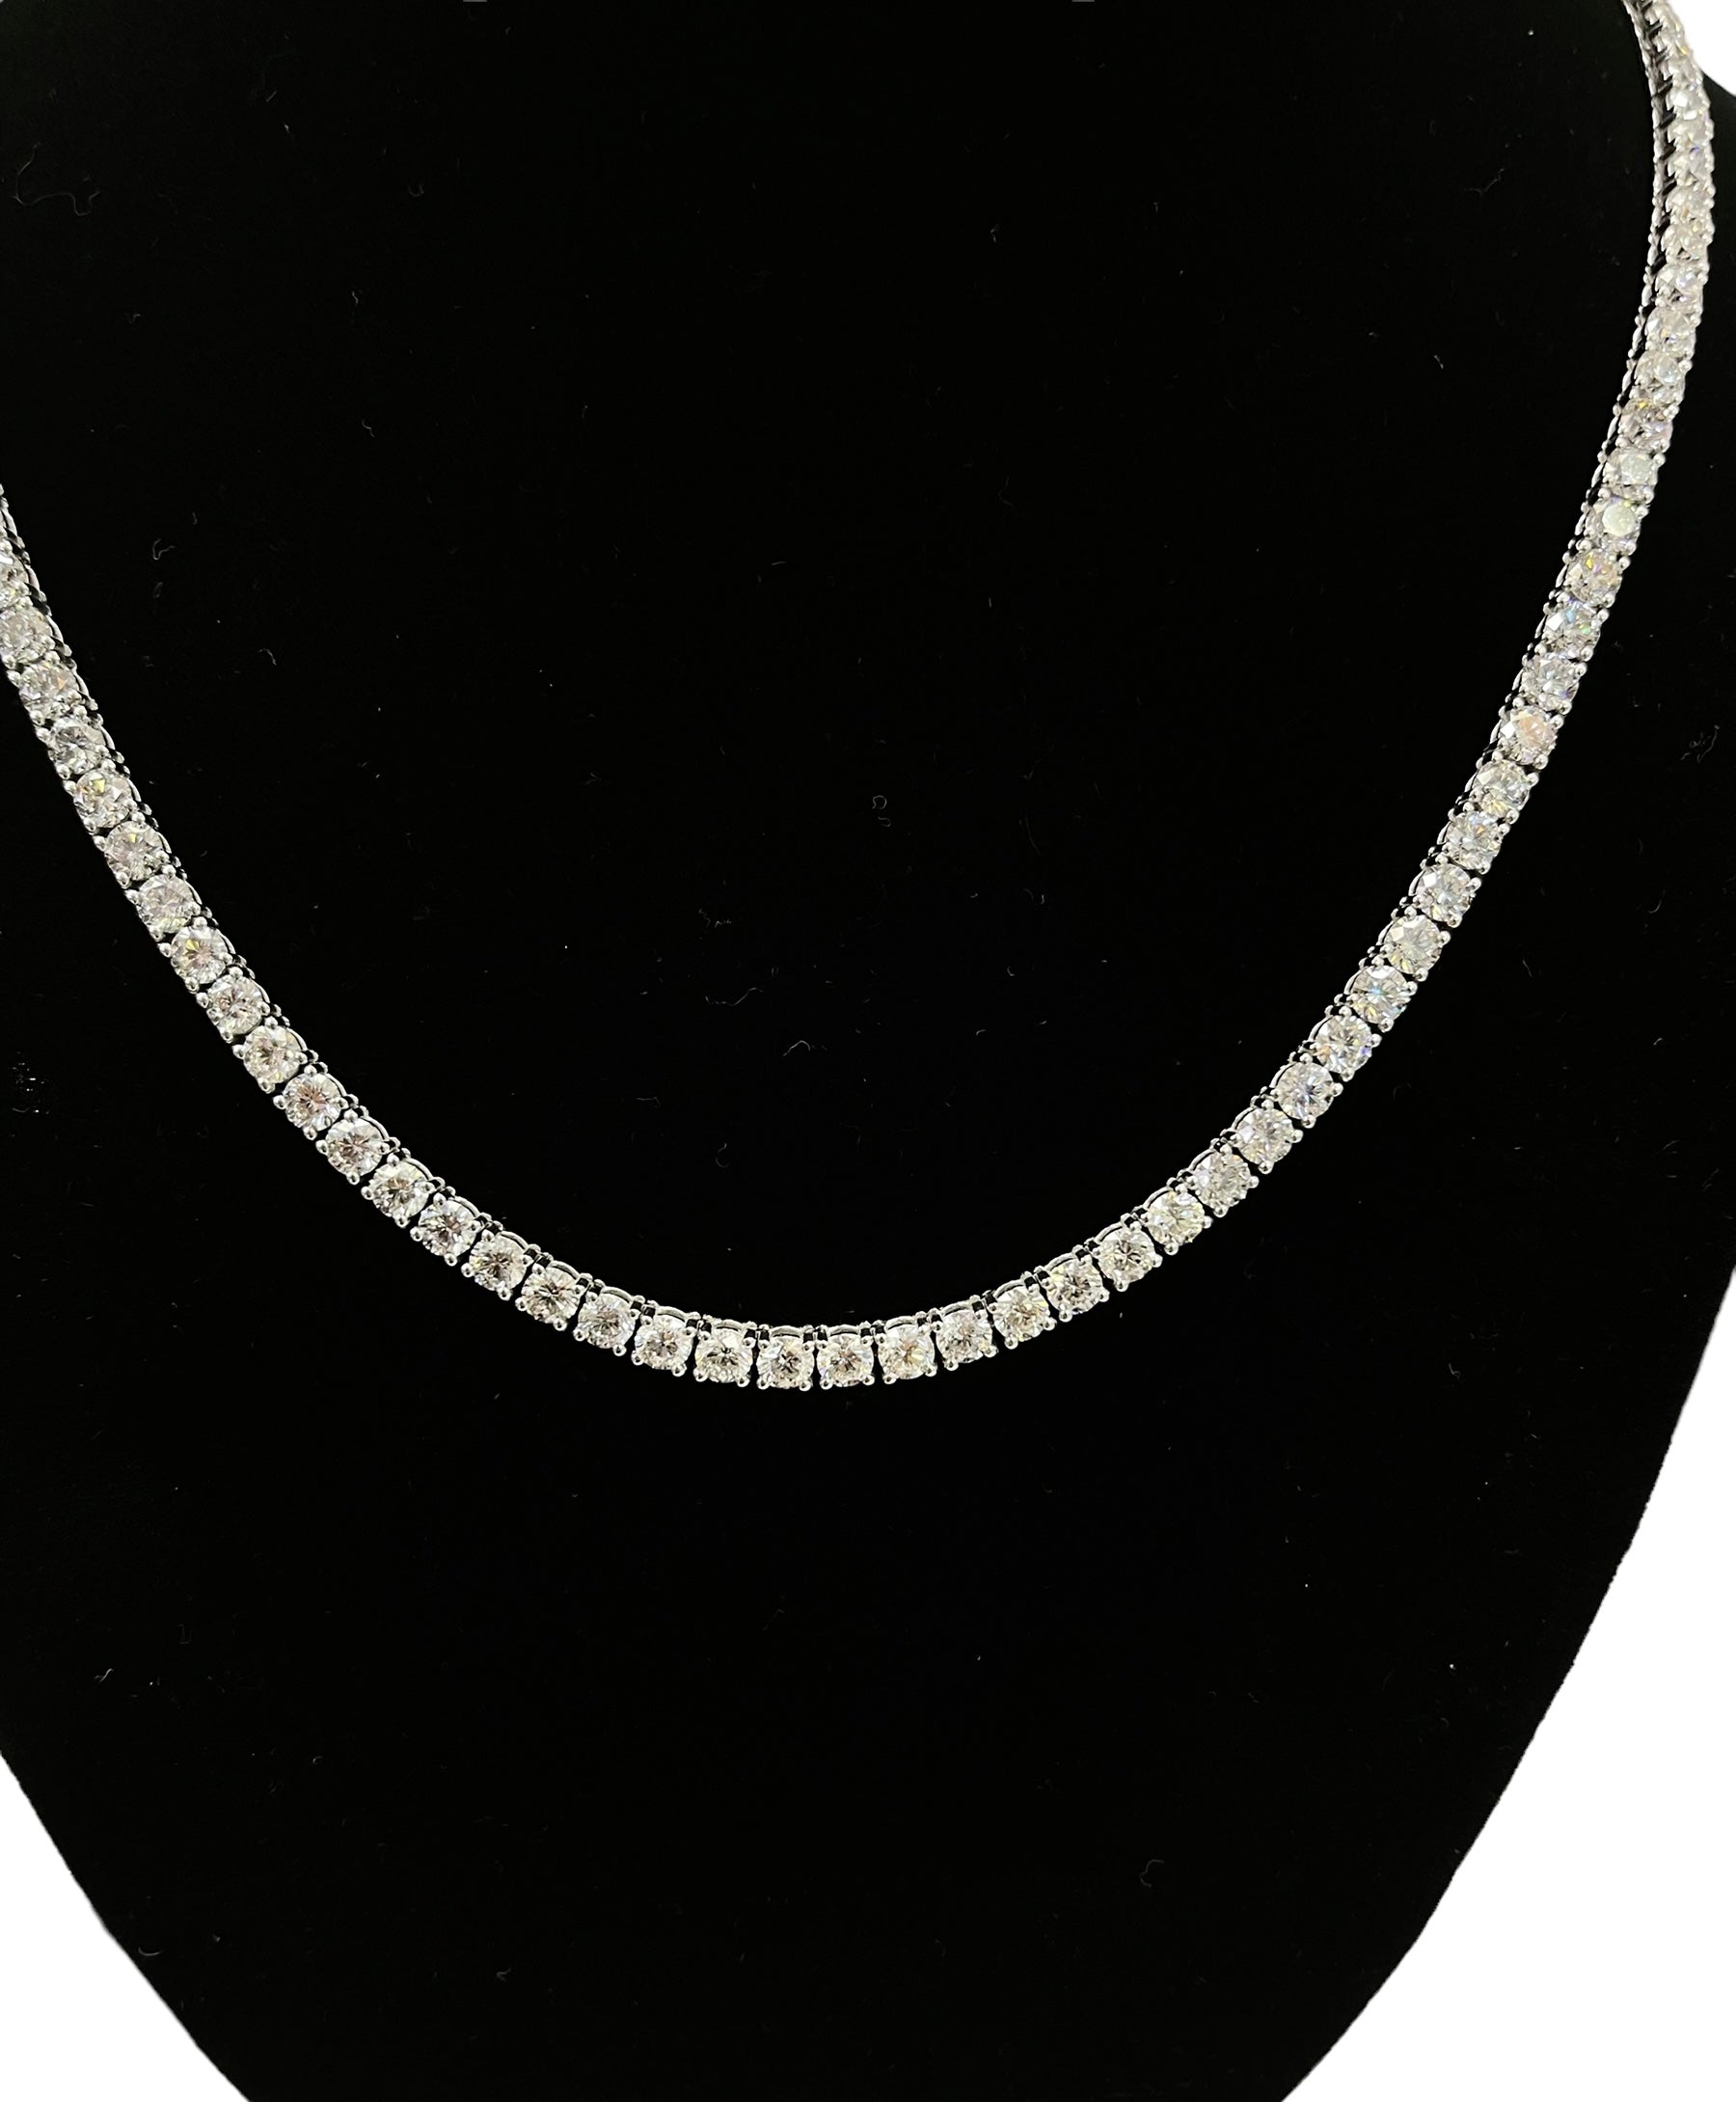 3/4/5/6mm Simulated Diamond Ice Out Tennis Chain Necklace 14k White Gold  Finish | eBay